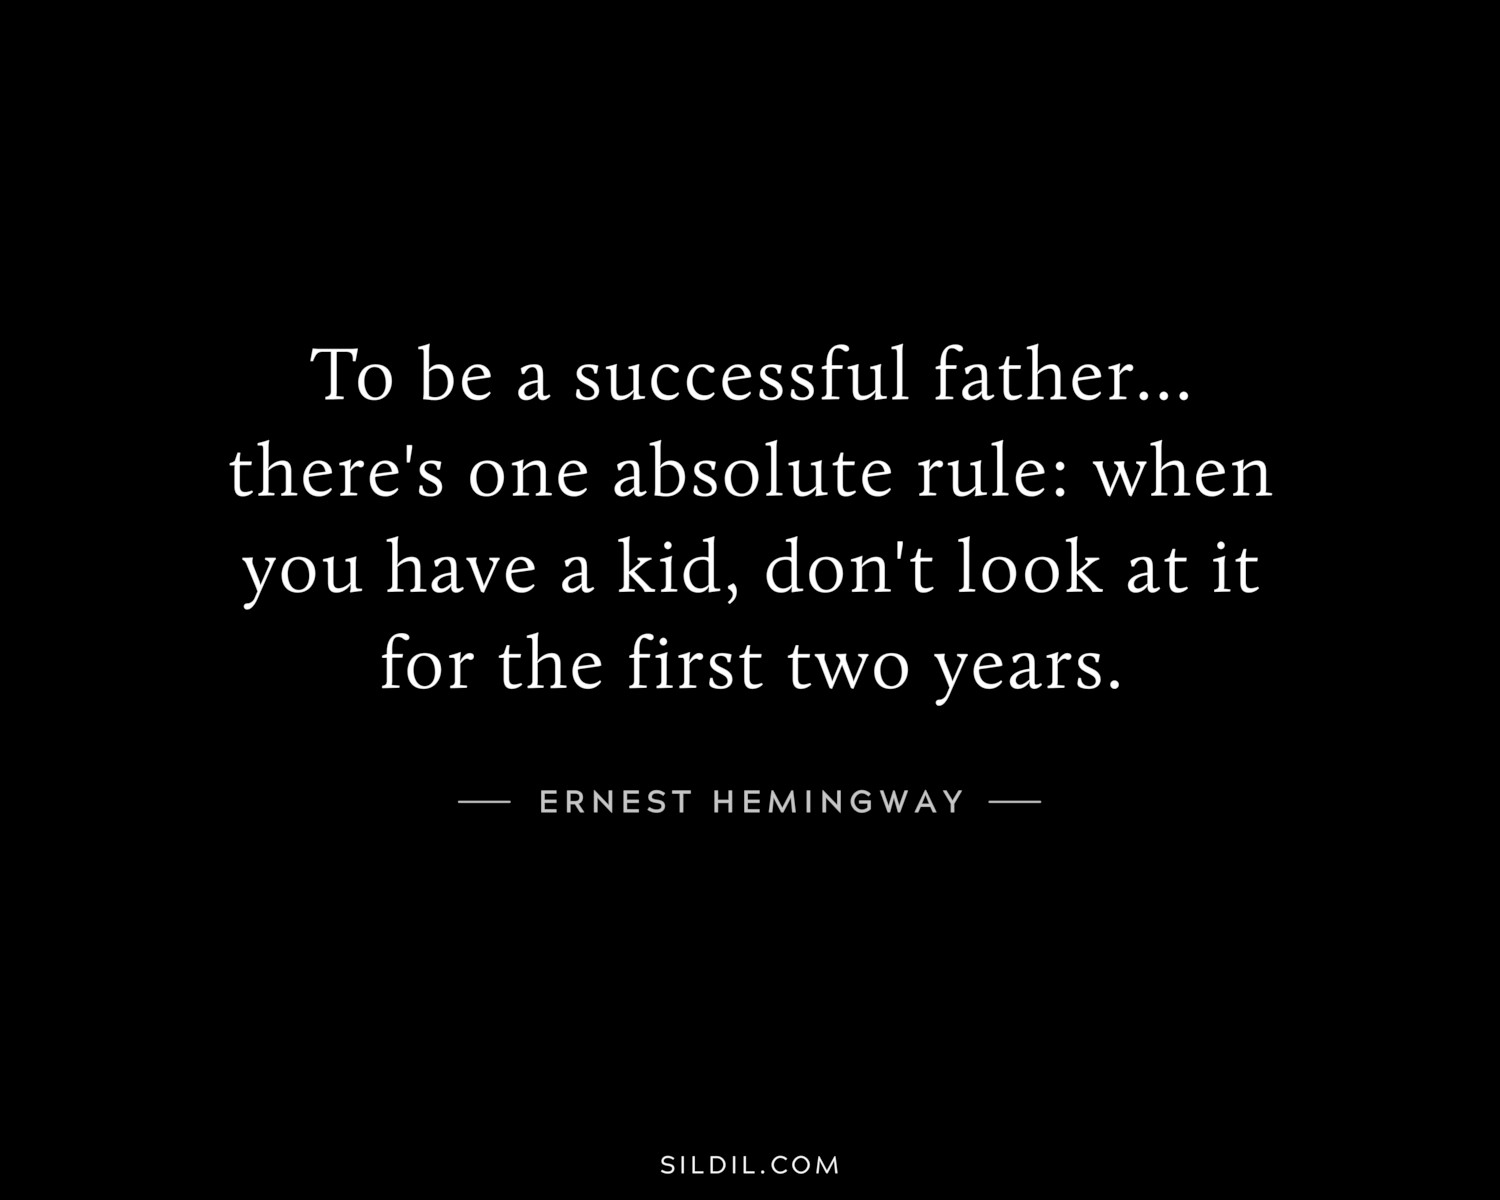 To be a successful father... there's one absolute rule: when you have a kid, don't look at it for the first two years.